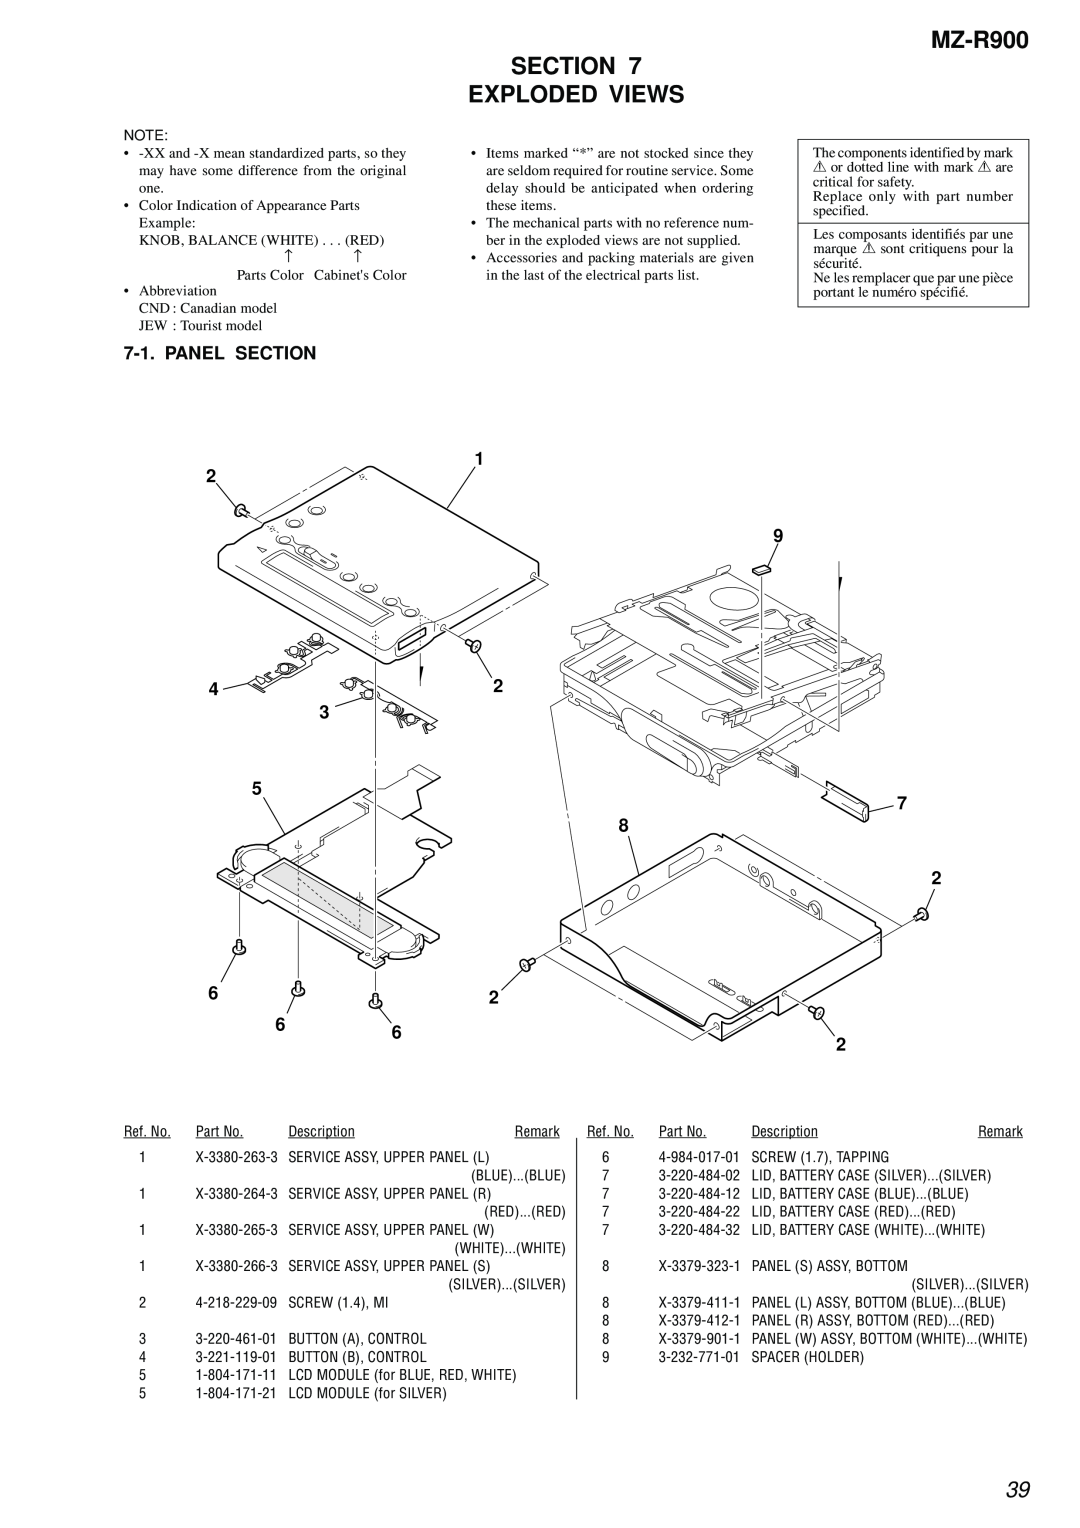 Sony MZ-R900 service manual Section Exploded Views, Panel, 1 9 2 7 8 2 2 6 